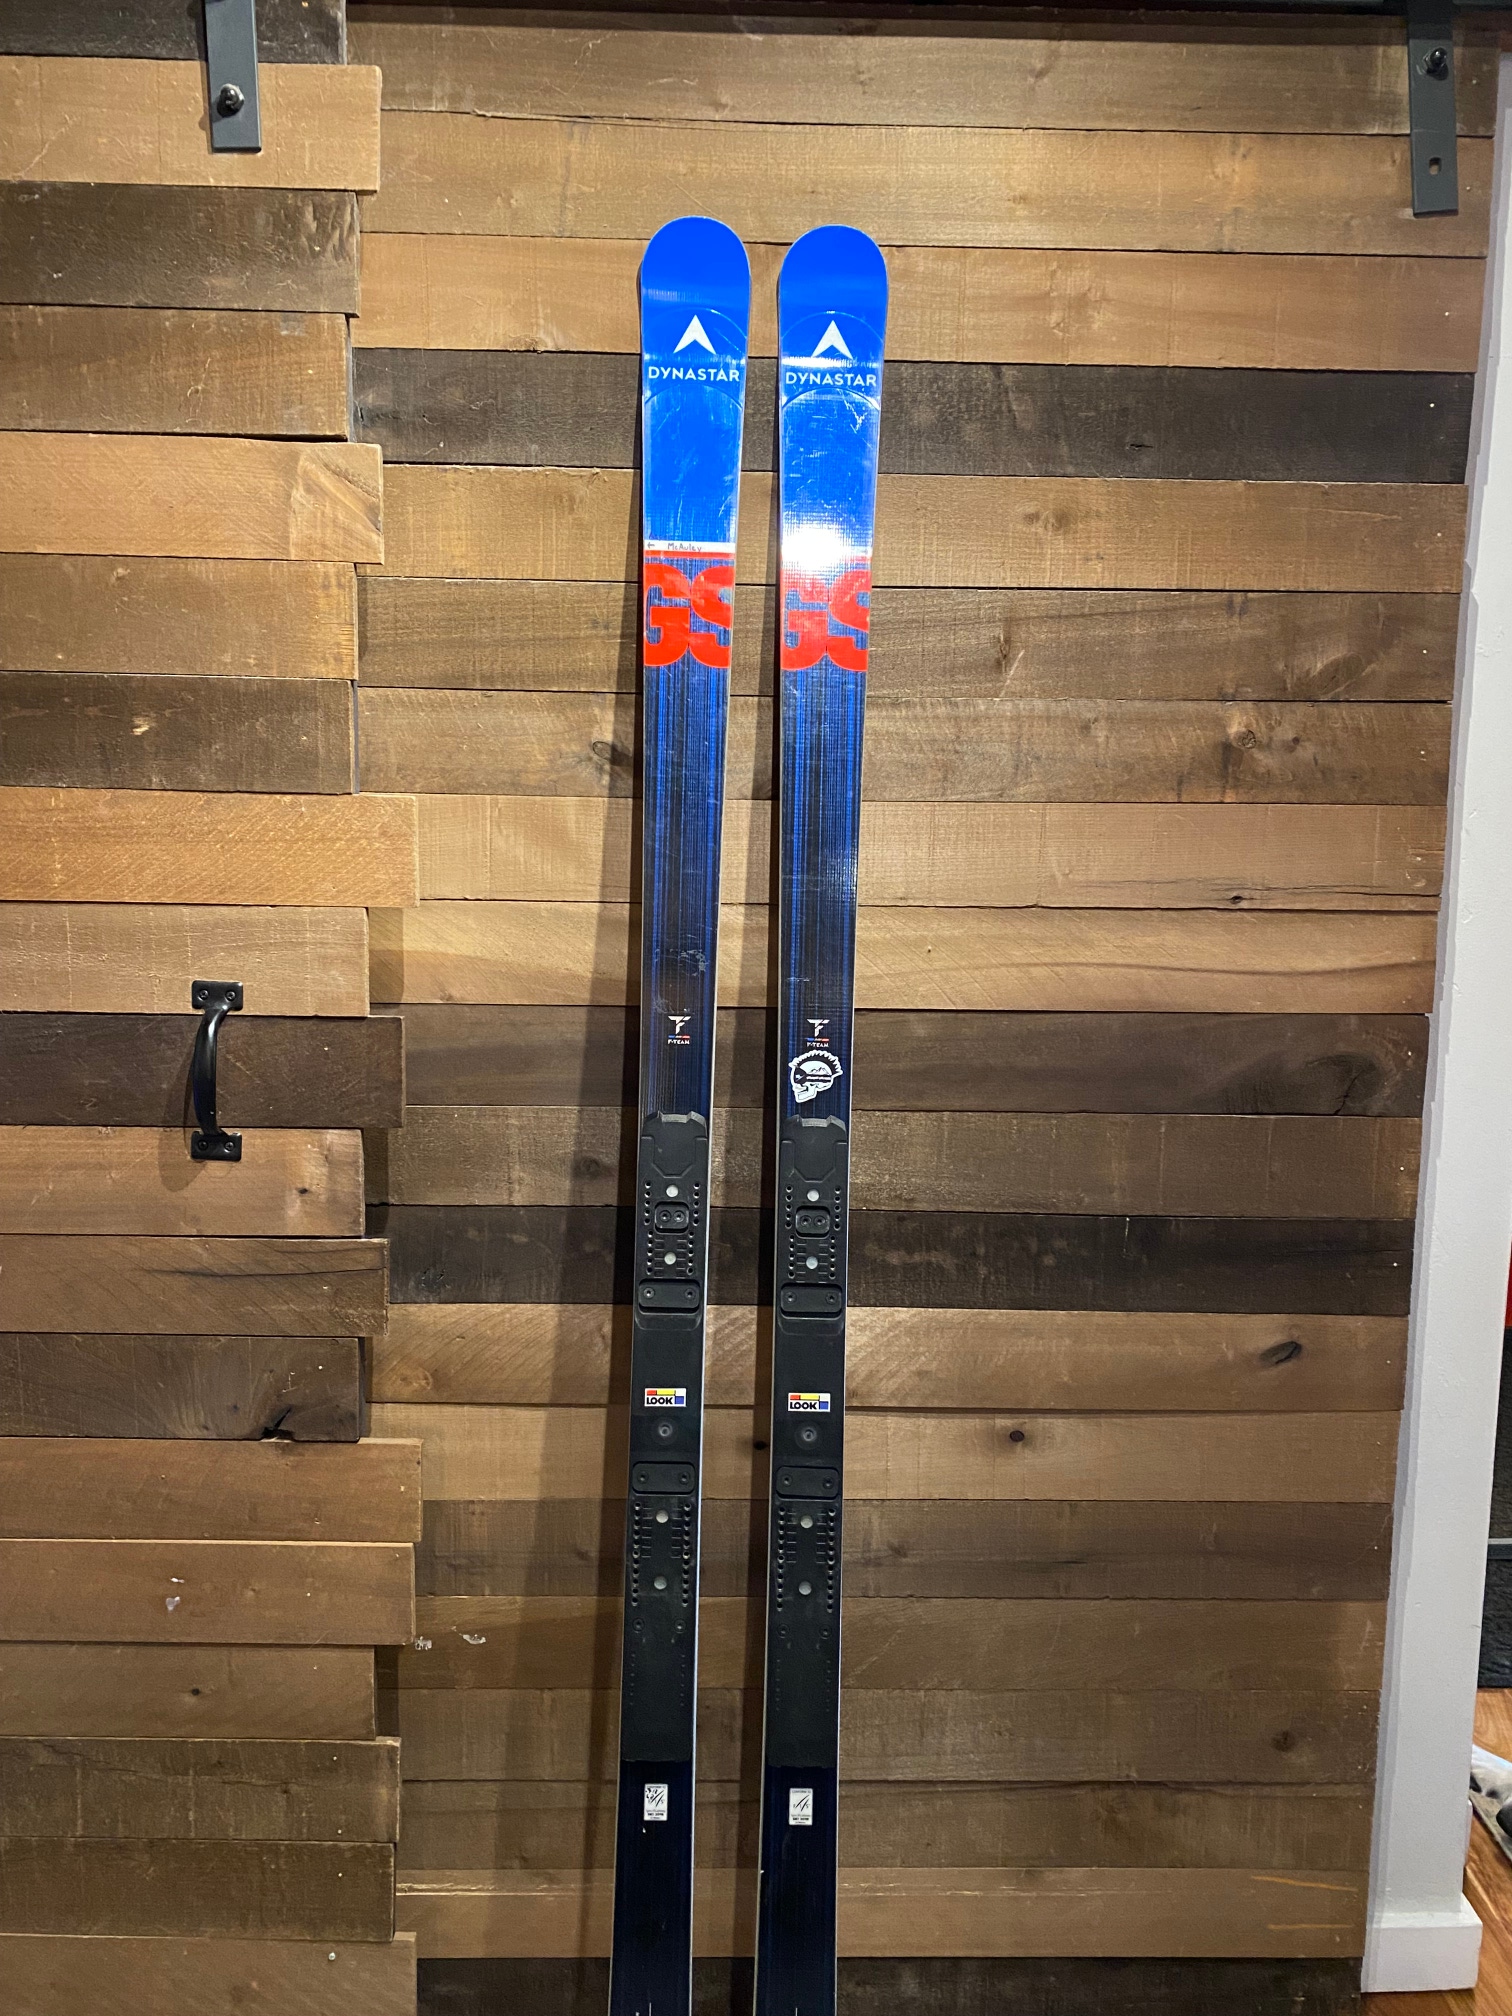 2022 Dynastar 188 cm Racing Speed WC FIS GS Skis Without Bindings (Pair 1)